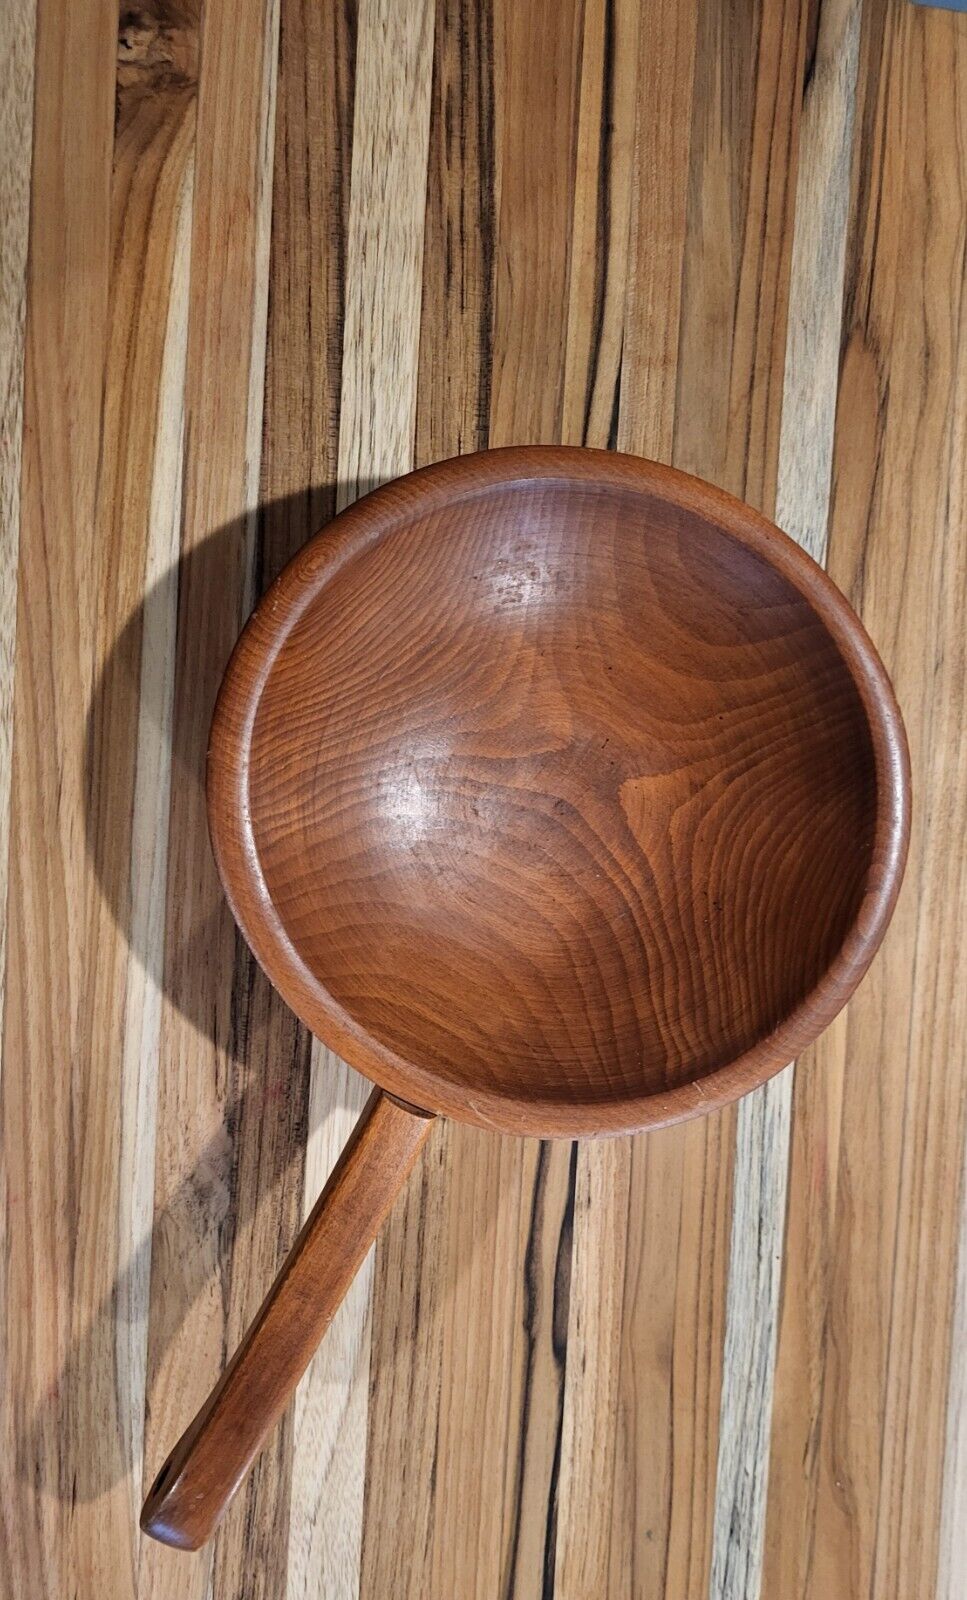 Vintage Munising Footed Wood Bowl with Handle